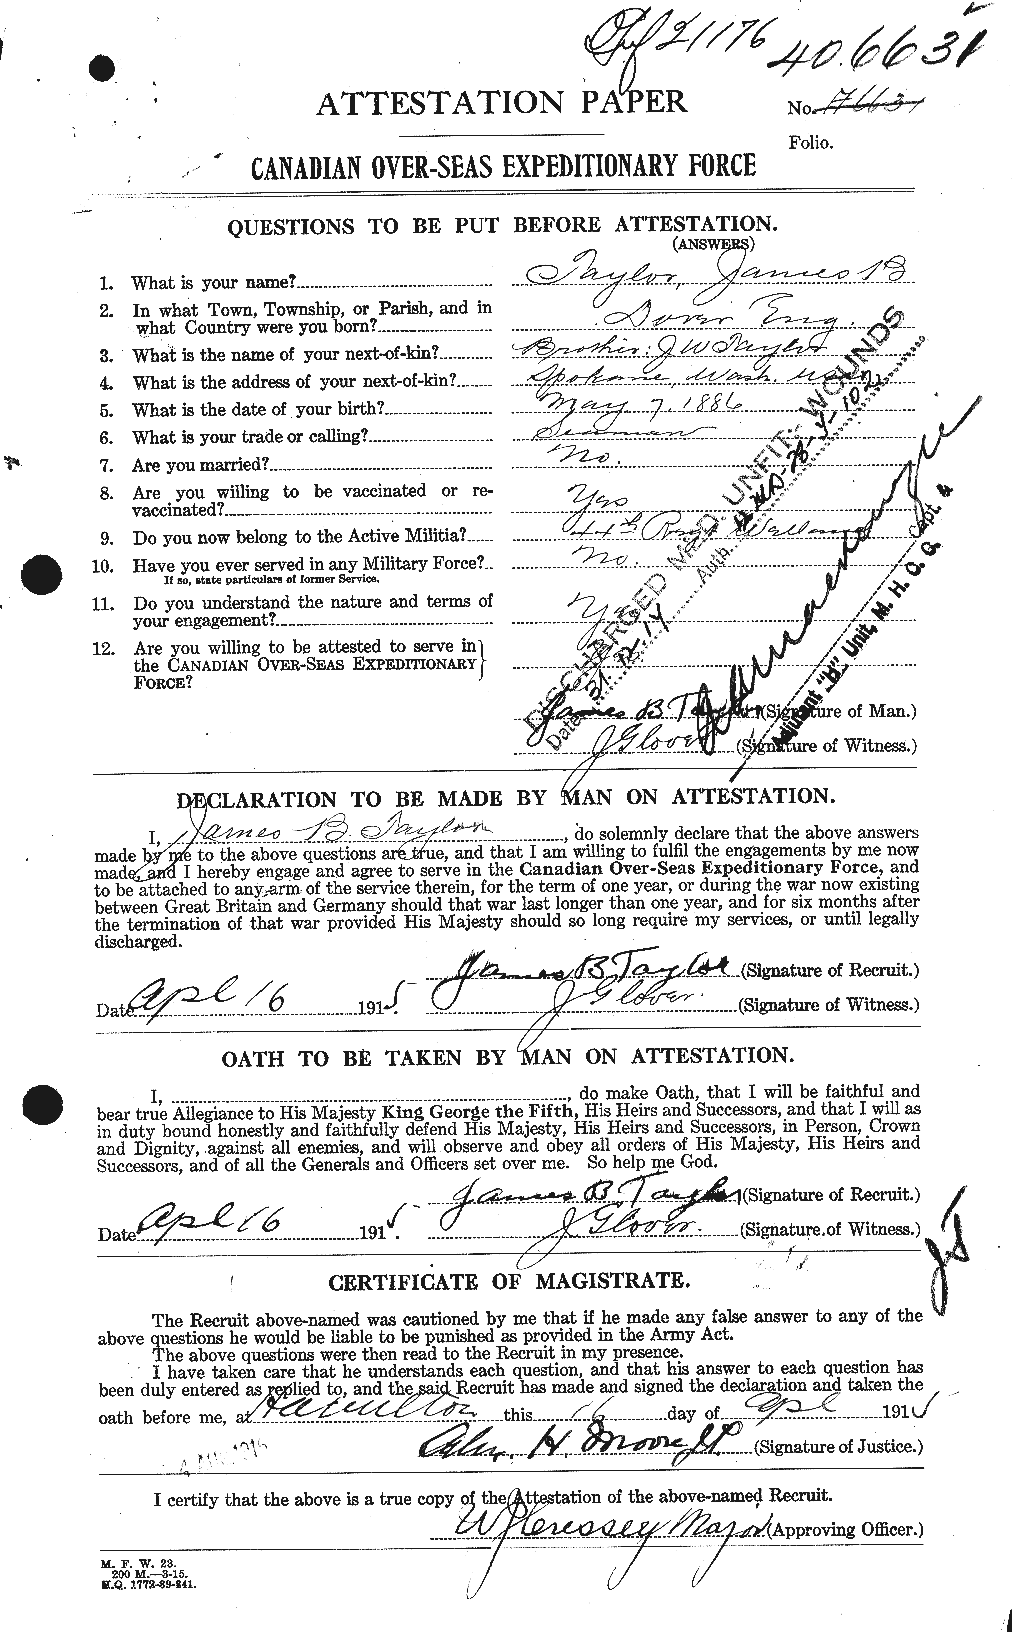 Personnel Records of the First World War - CEF 626907a